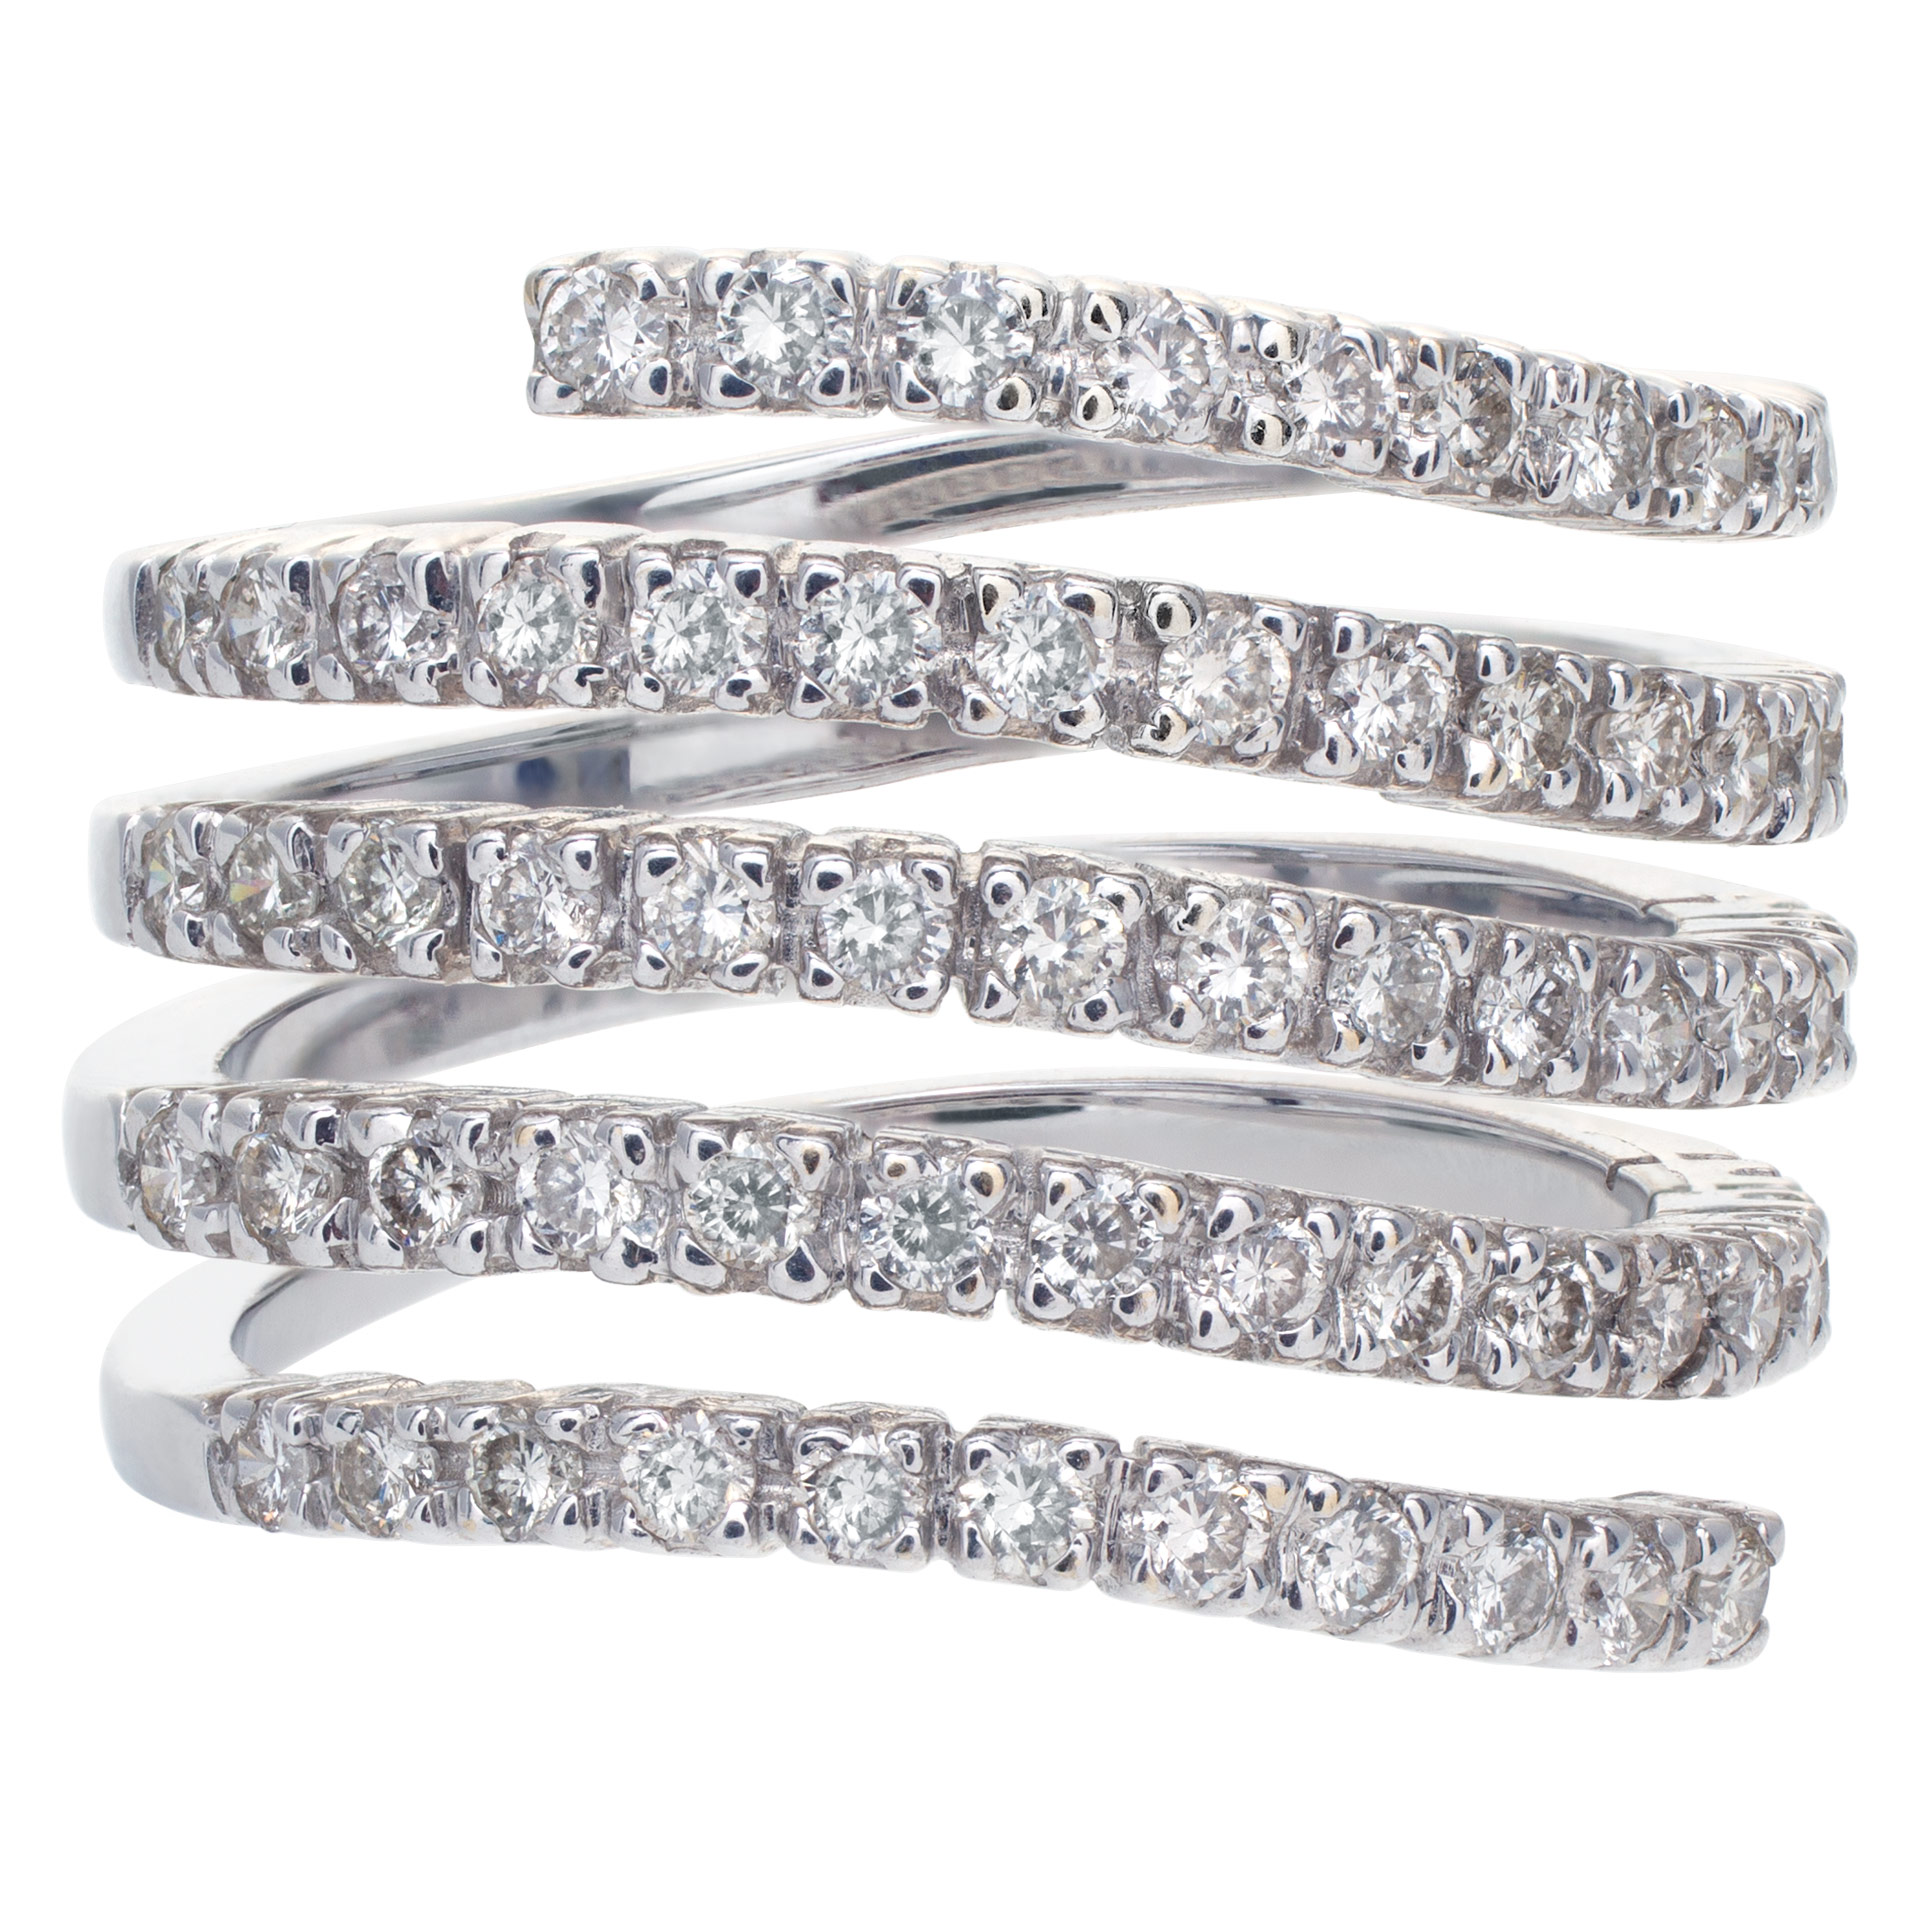 Diamond Band and Ring in 18k white gold